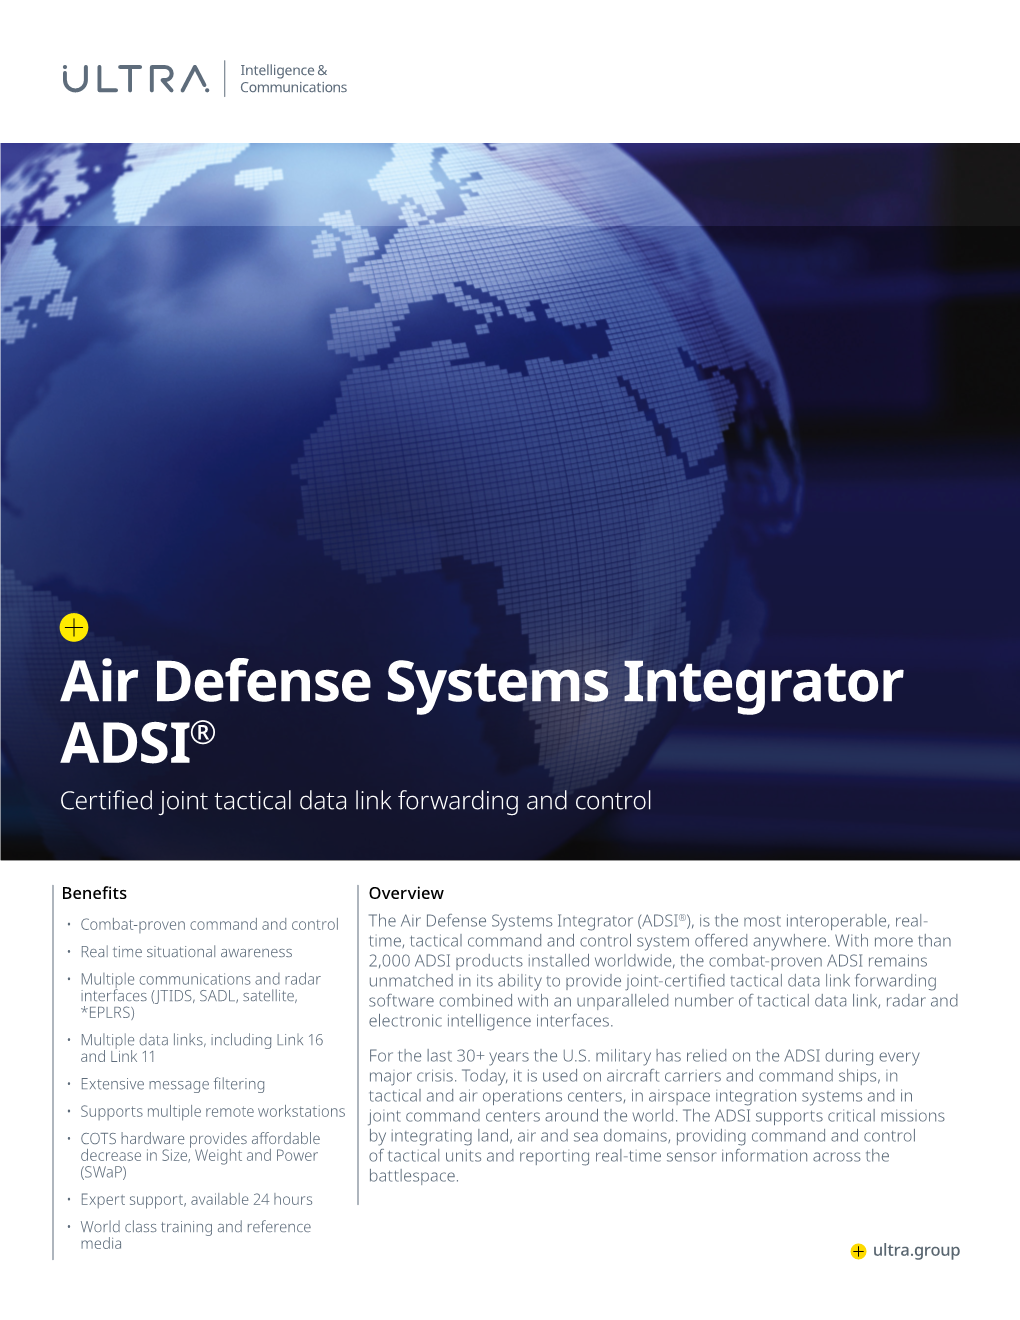 Air Defense Systems Integrator ADSI® Certified Joint Tactical Data Link Forwarding and Control